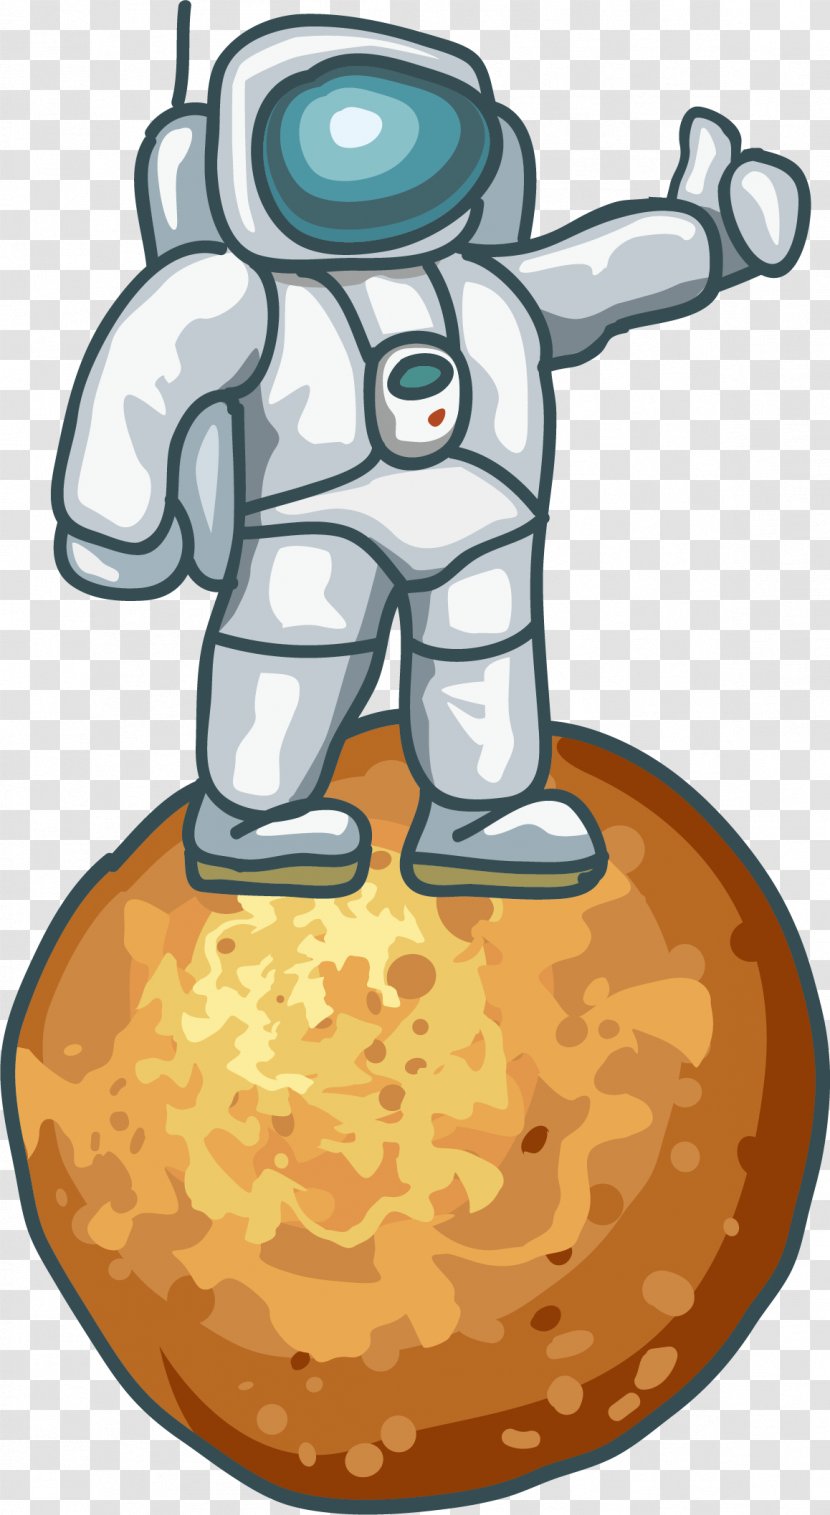 Outer Space Astronaut Drawing Illustration - People Standing On The Planet Transparent PNG